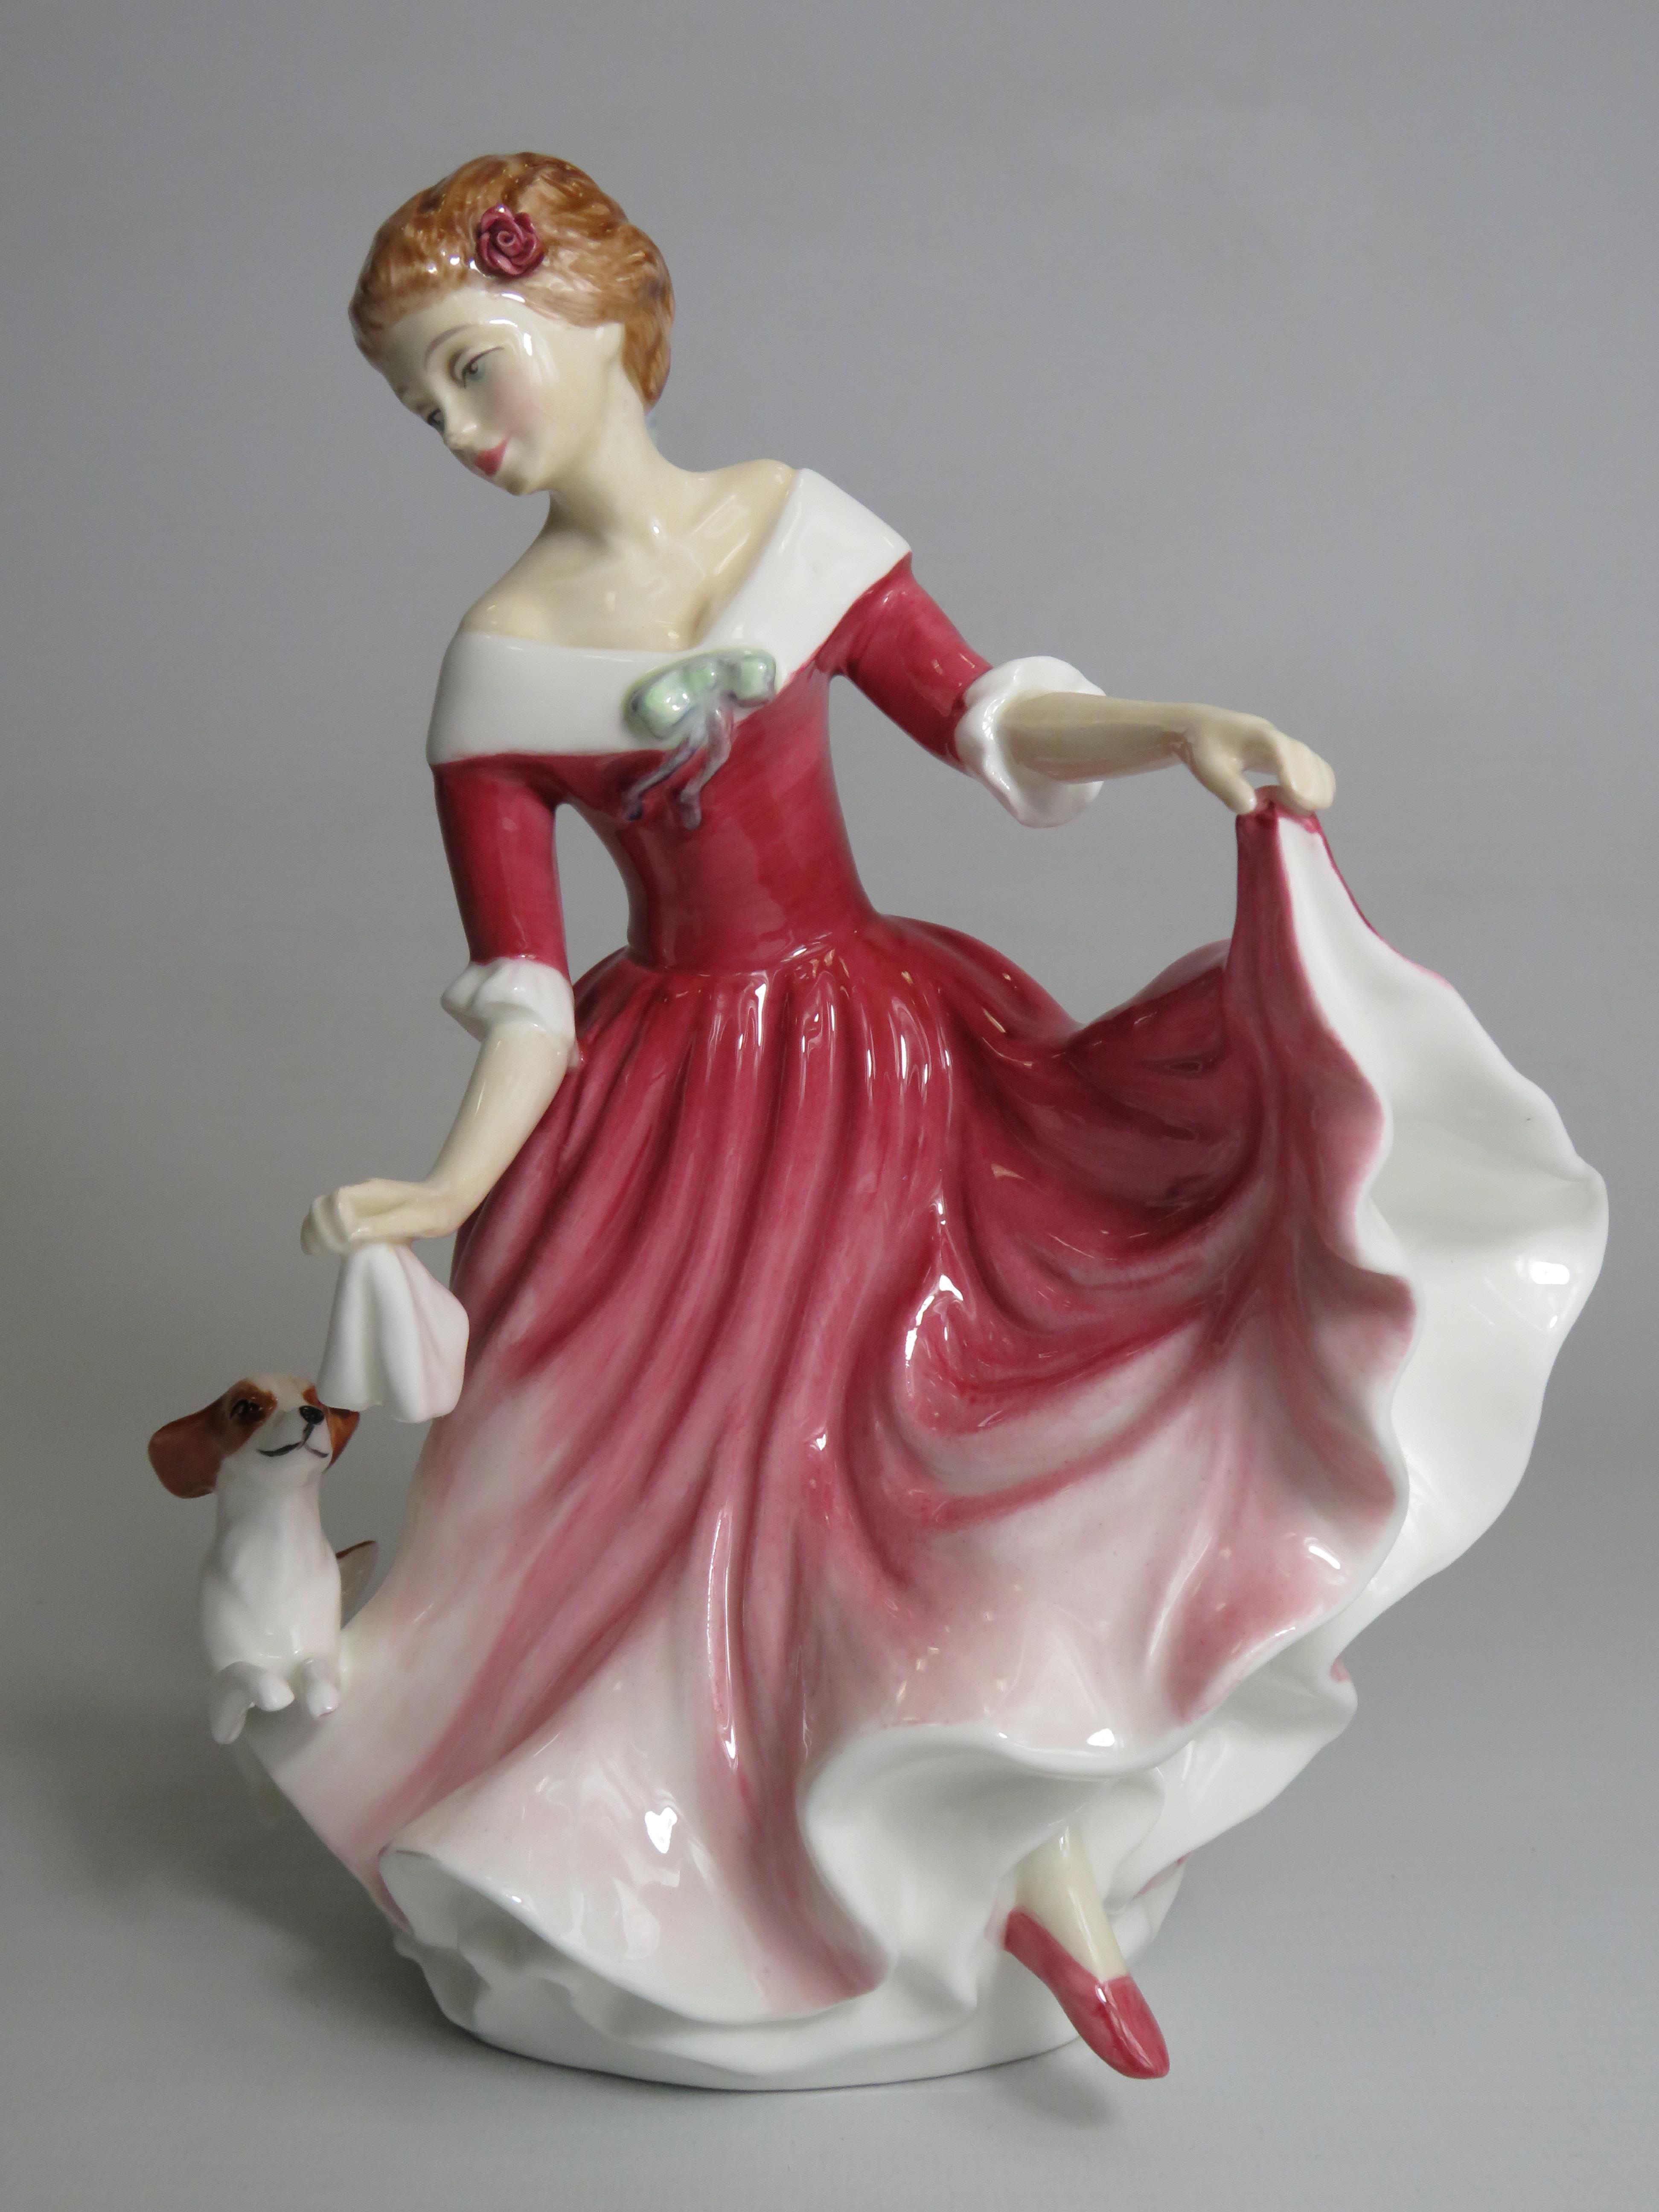 Royal Doulton Figurine My Best friend HN 3011, Approx 20cm tall. - Image 3 of 5